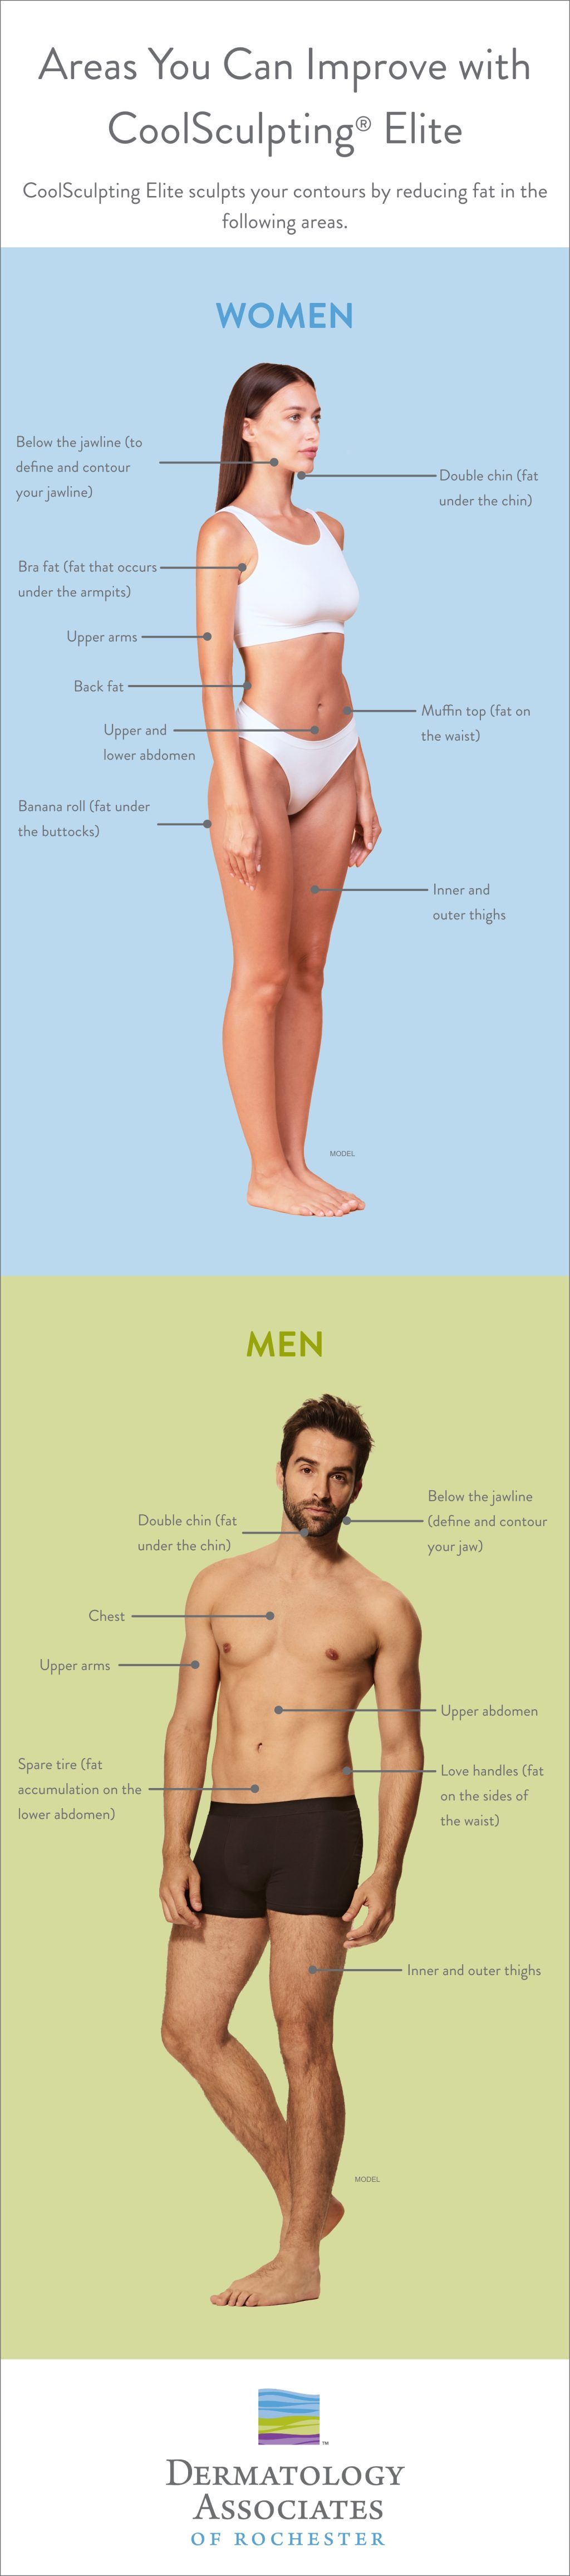 Infographic with an image of a woman and a man with text indications on where CoolSculpting® can sculpt contours and reduce fat. (MODELS)